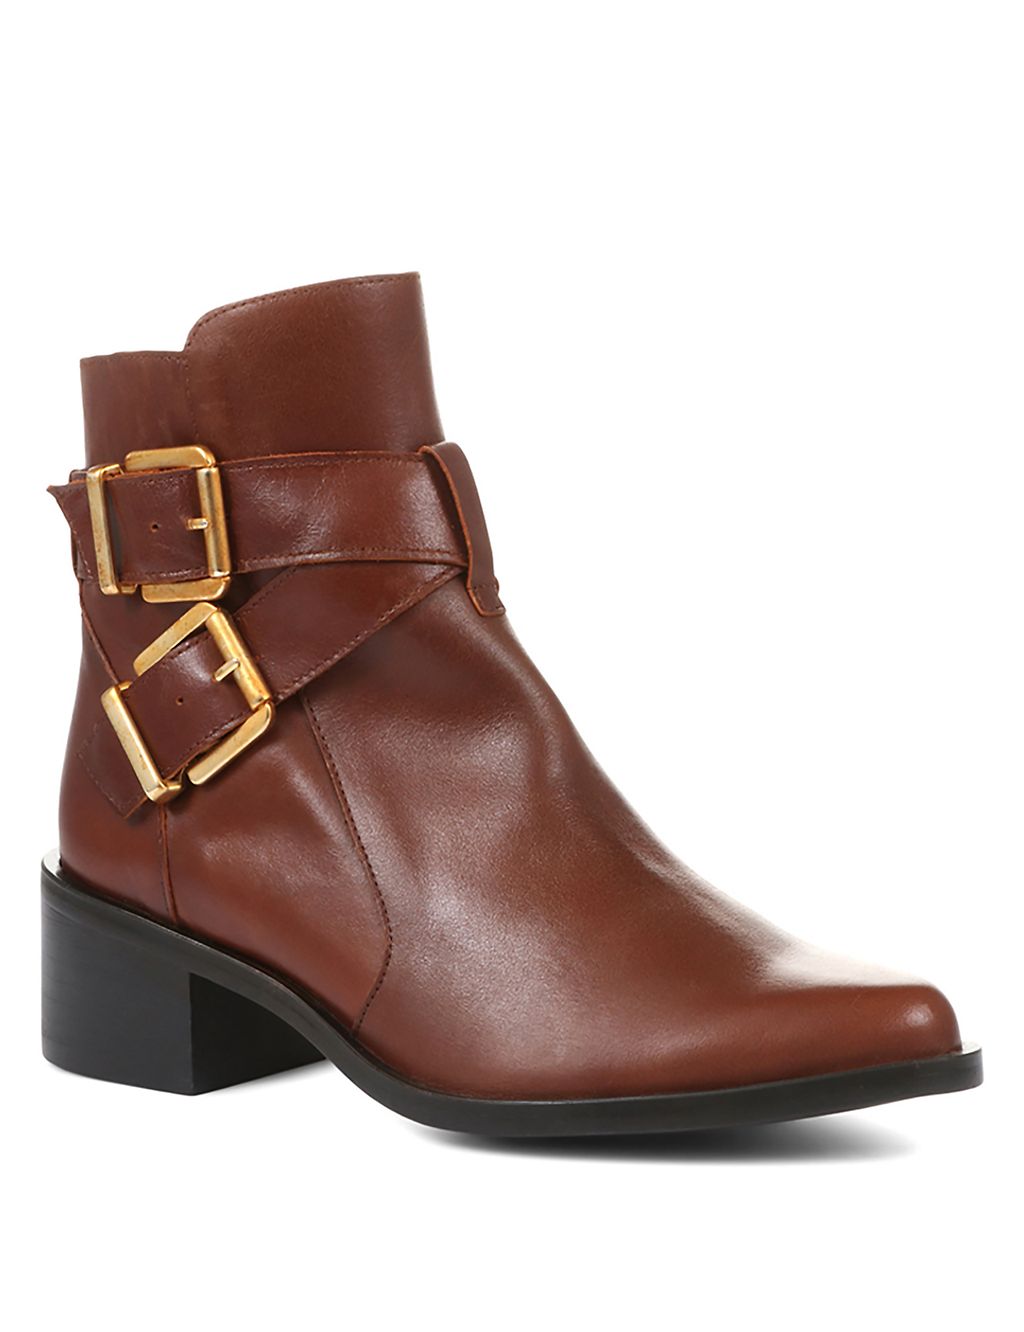 Leather Buckle Block Heel Ankle Boots 1 of 6